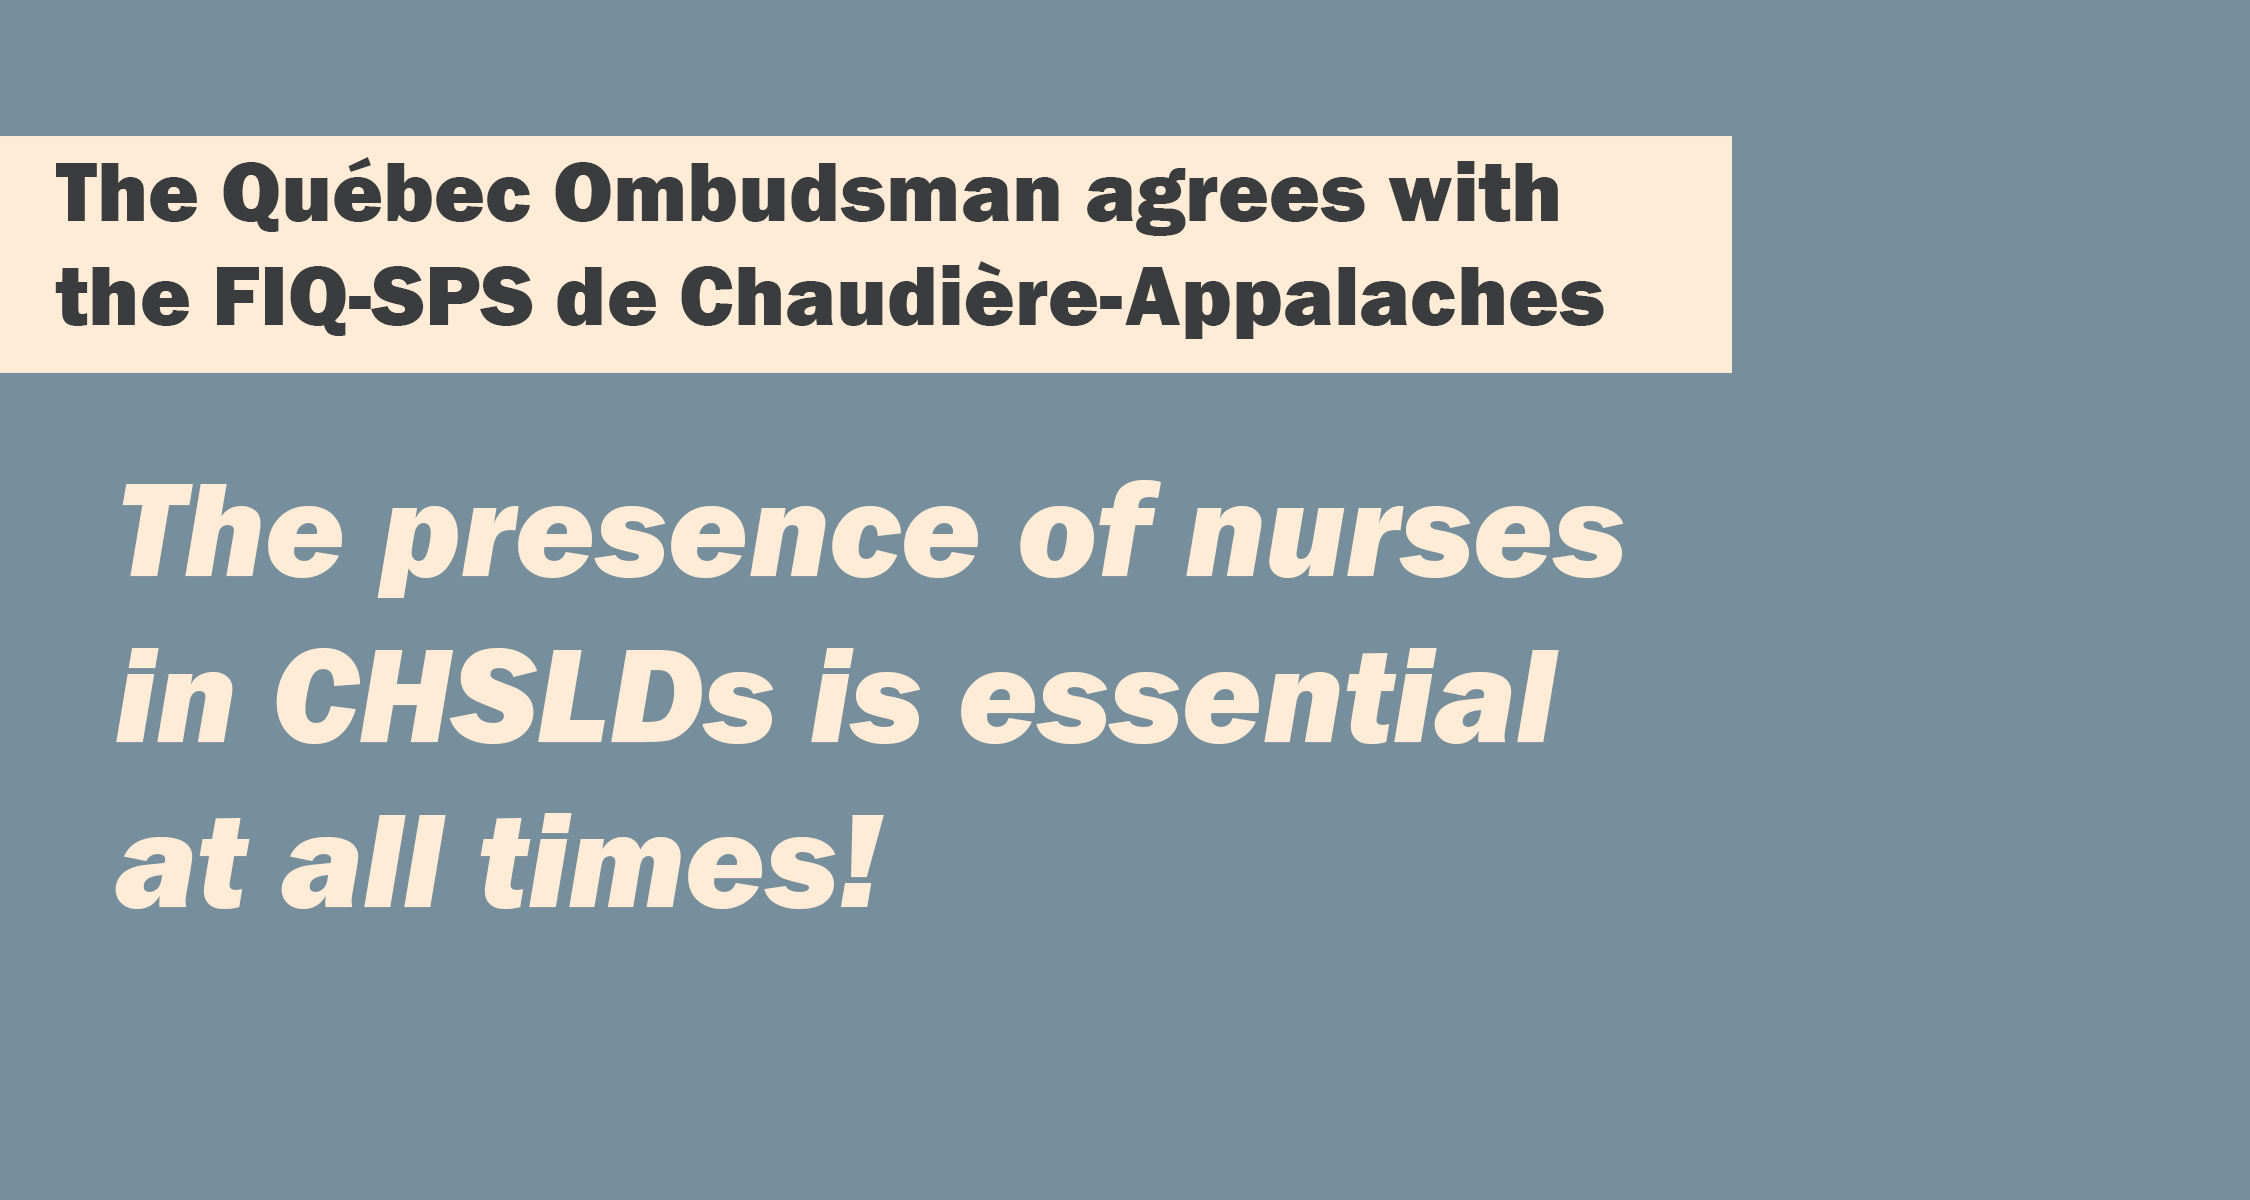 The Québec Ombudsman agrees with the SPSCA : the presence of nurses in CHSLDs is essential at all times!